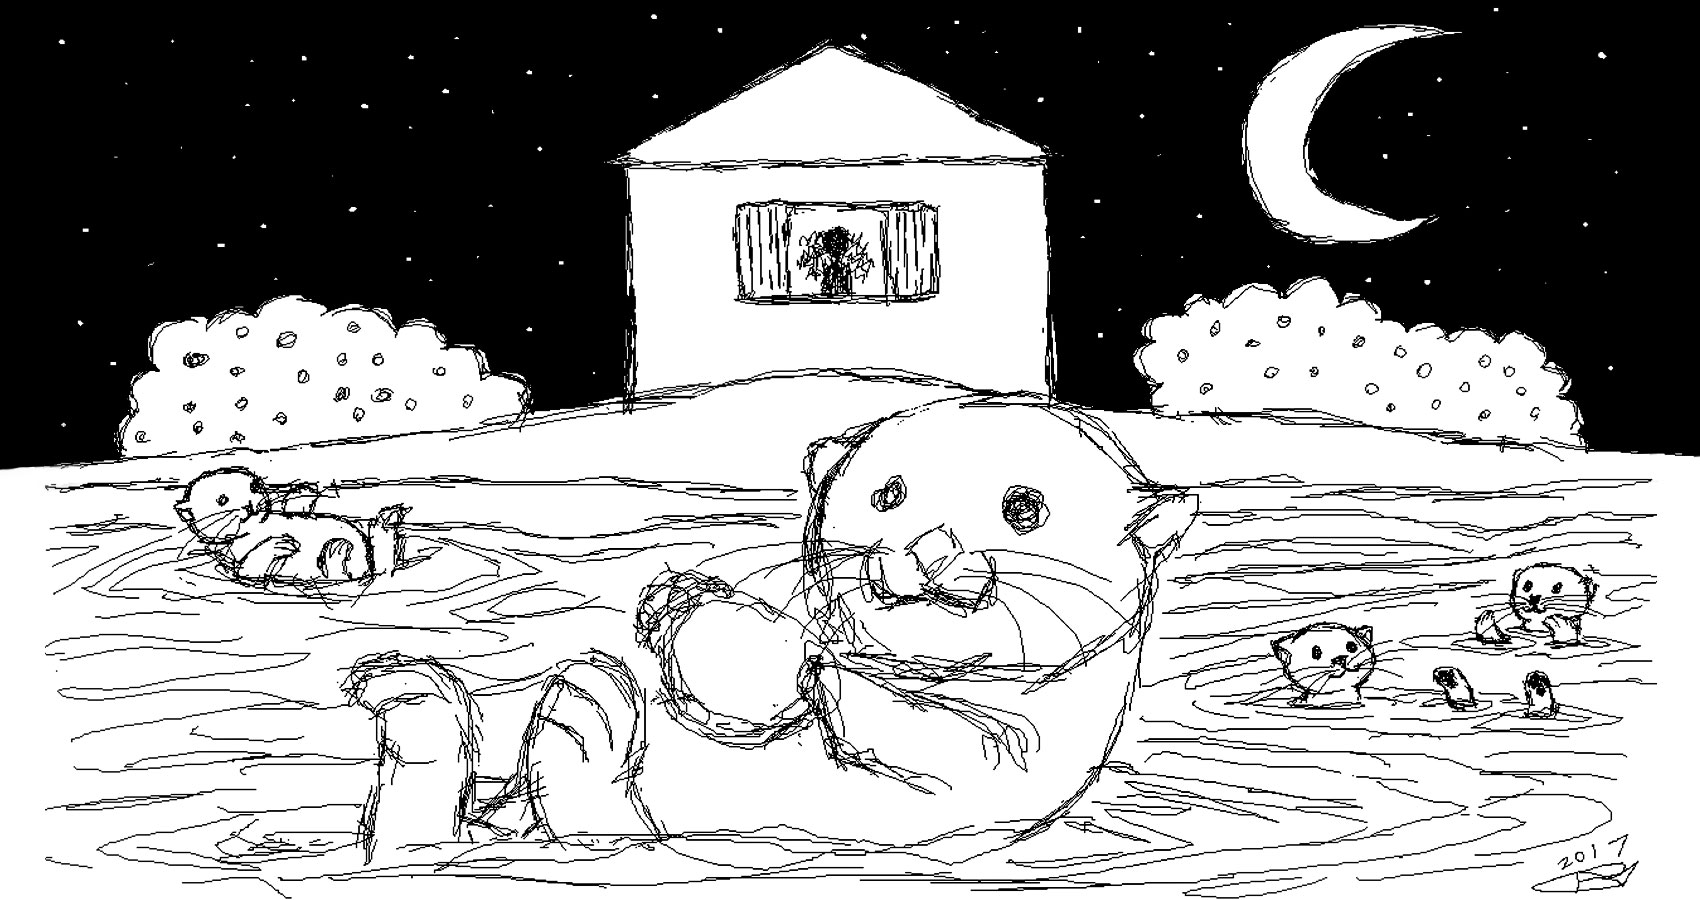 Otters In The Lake by Robyn MacKinnon at Spillwords.com